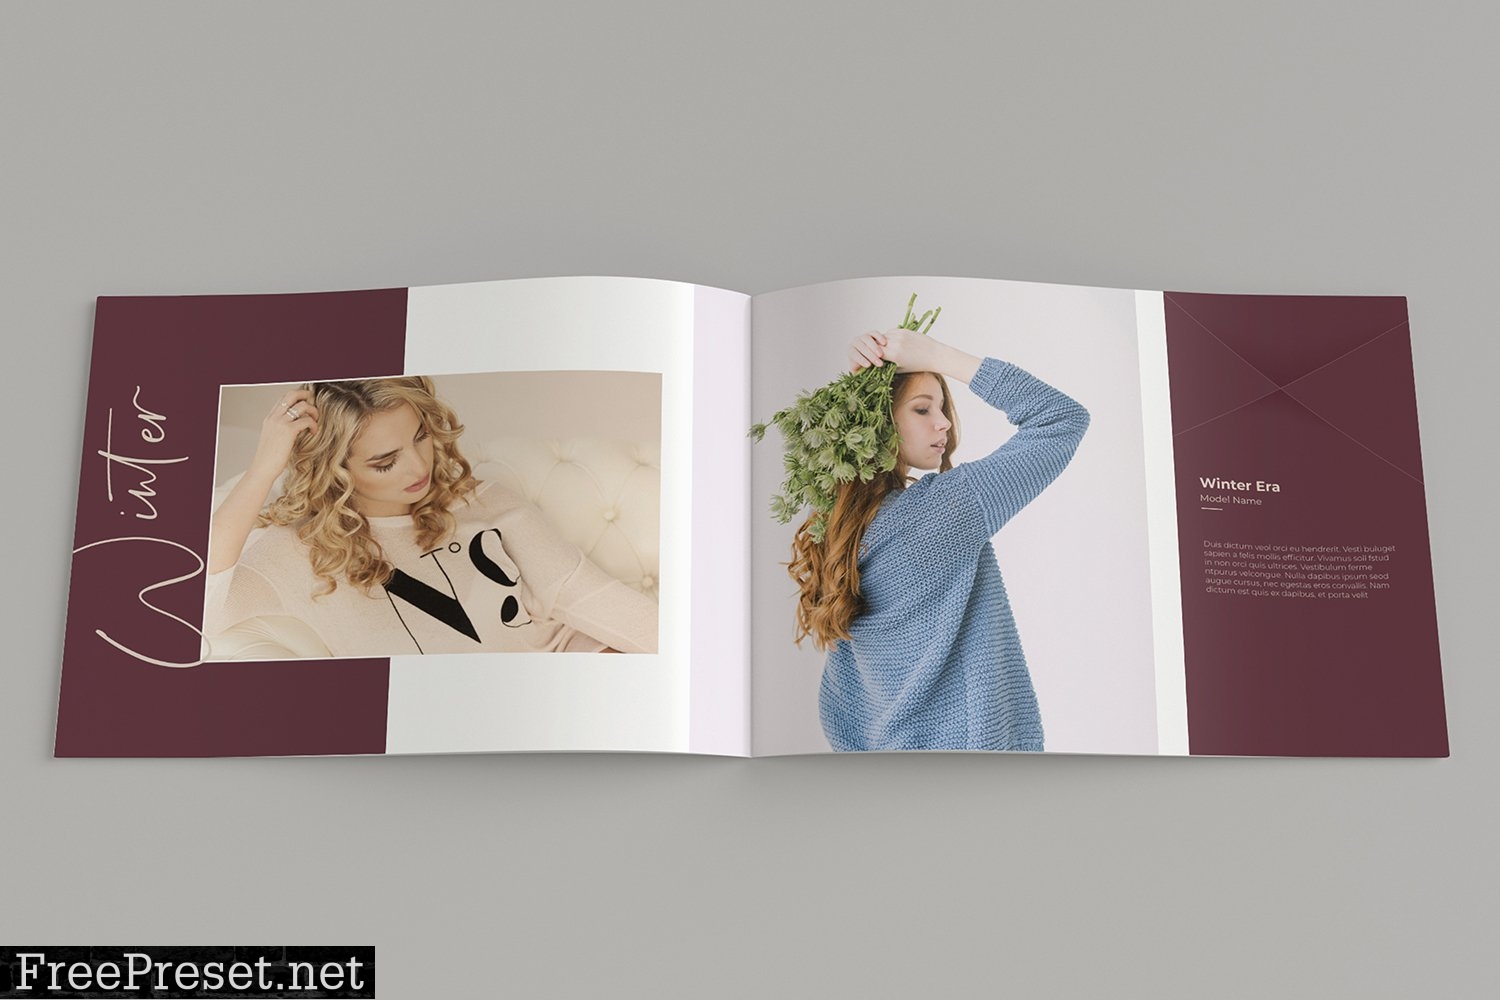 Pure Hand Drawing Photoshop Action 5354336Fashion Lookbook Template 5258972